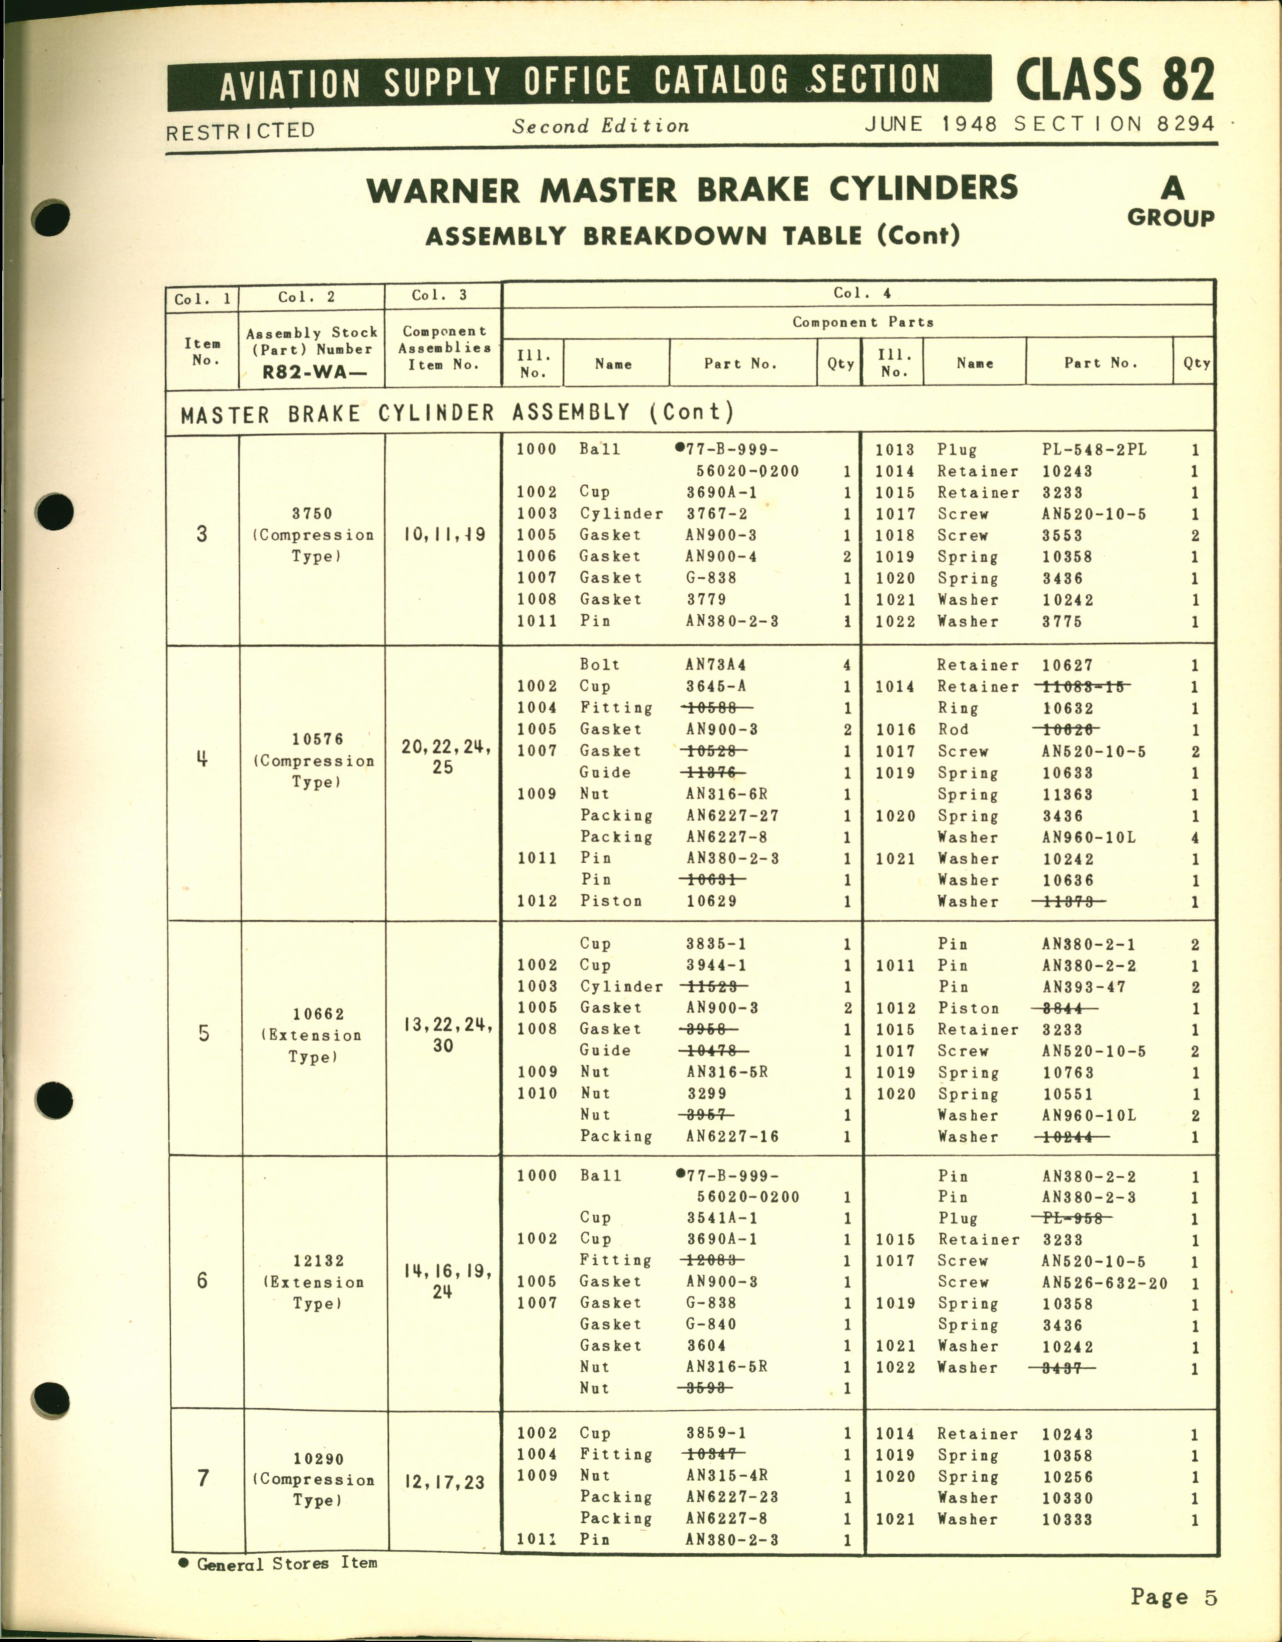 Sample page 5 from AirCorps Library document: Master Brake Cylinders for Bendix, Goodyear, Hayes, Warner, Air Associates